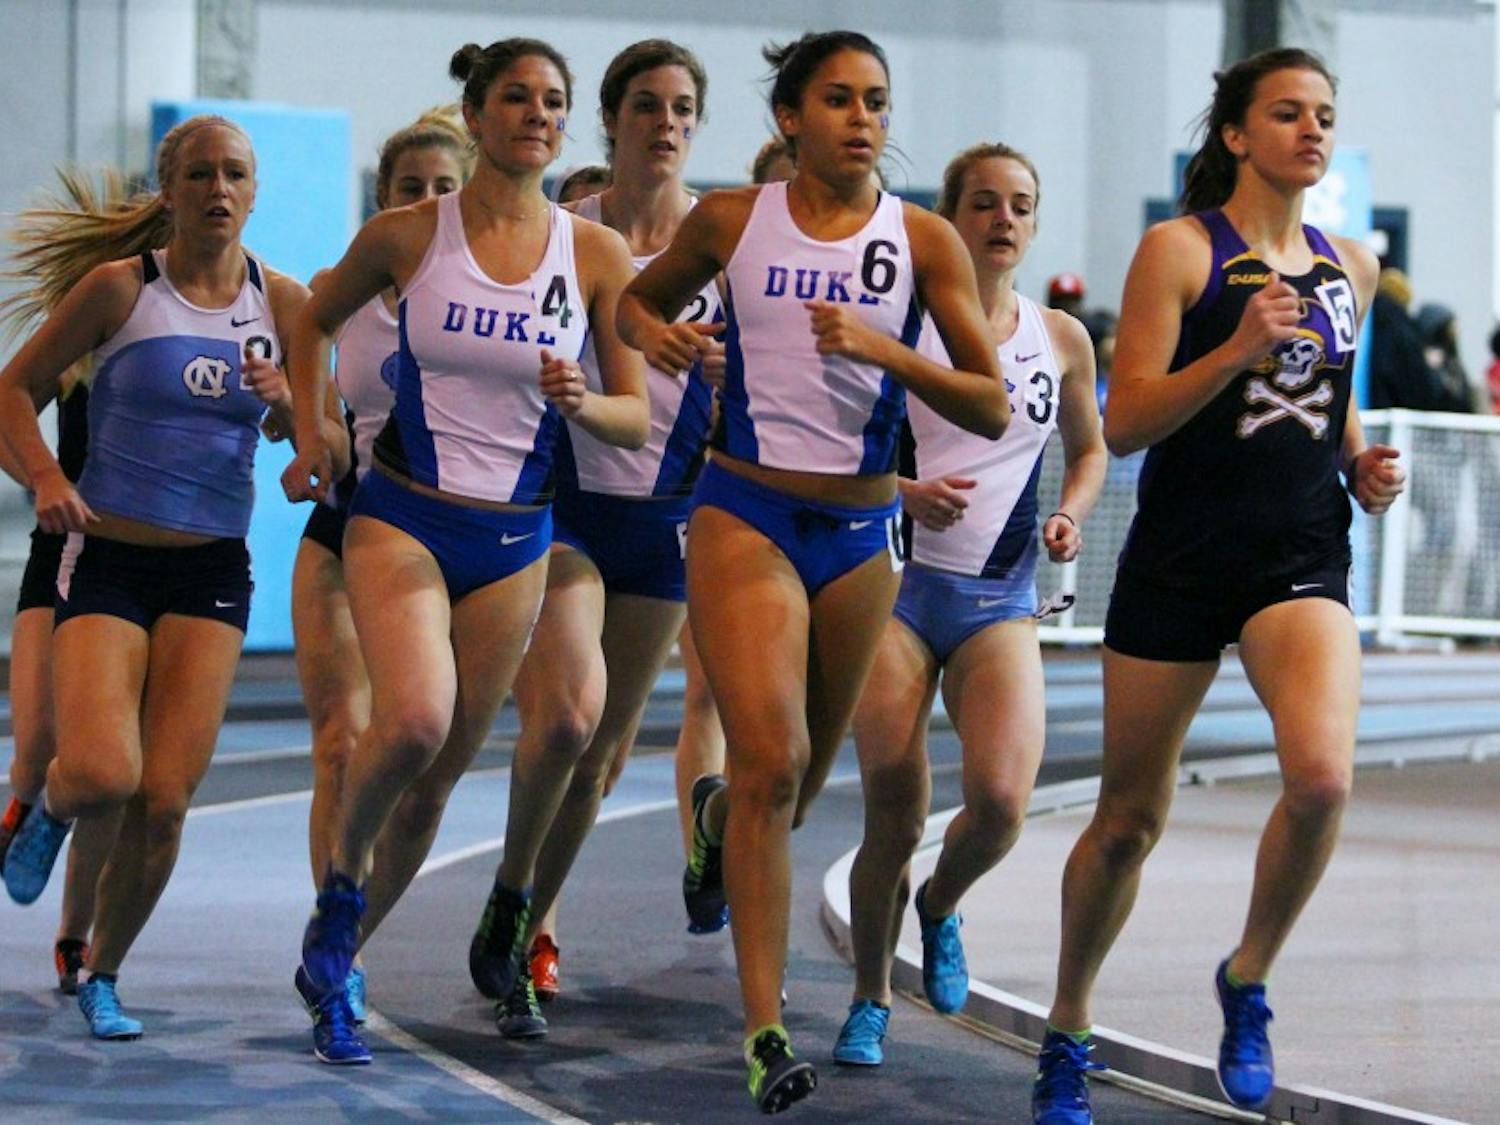 Fresh off a successful indoor campaign, the Blue Devils will look to capture the outdoor title at next weekend's ACC Championship.